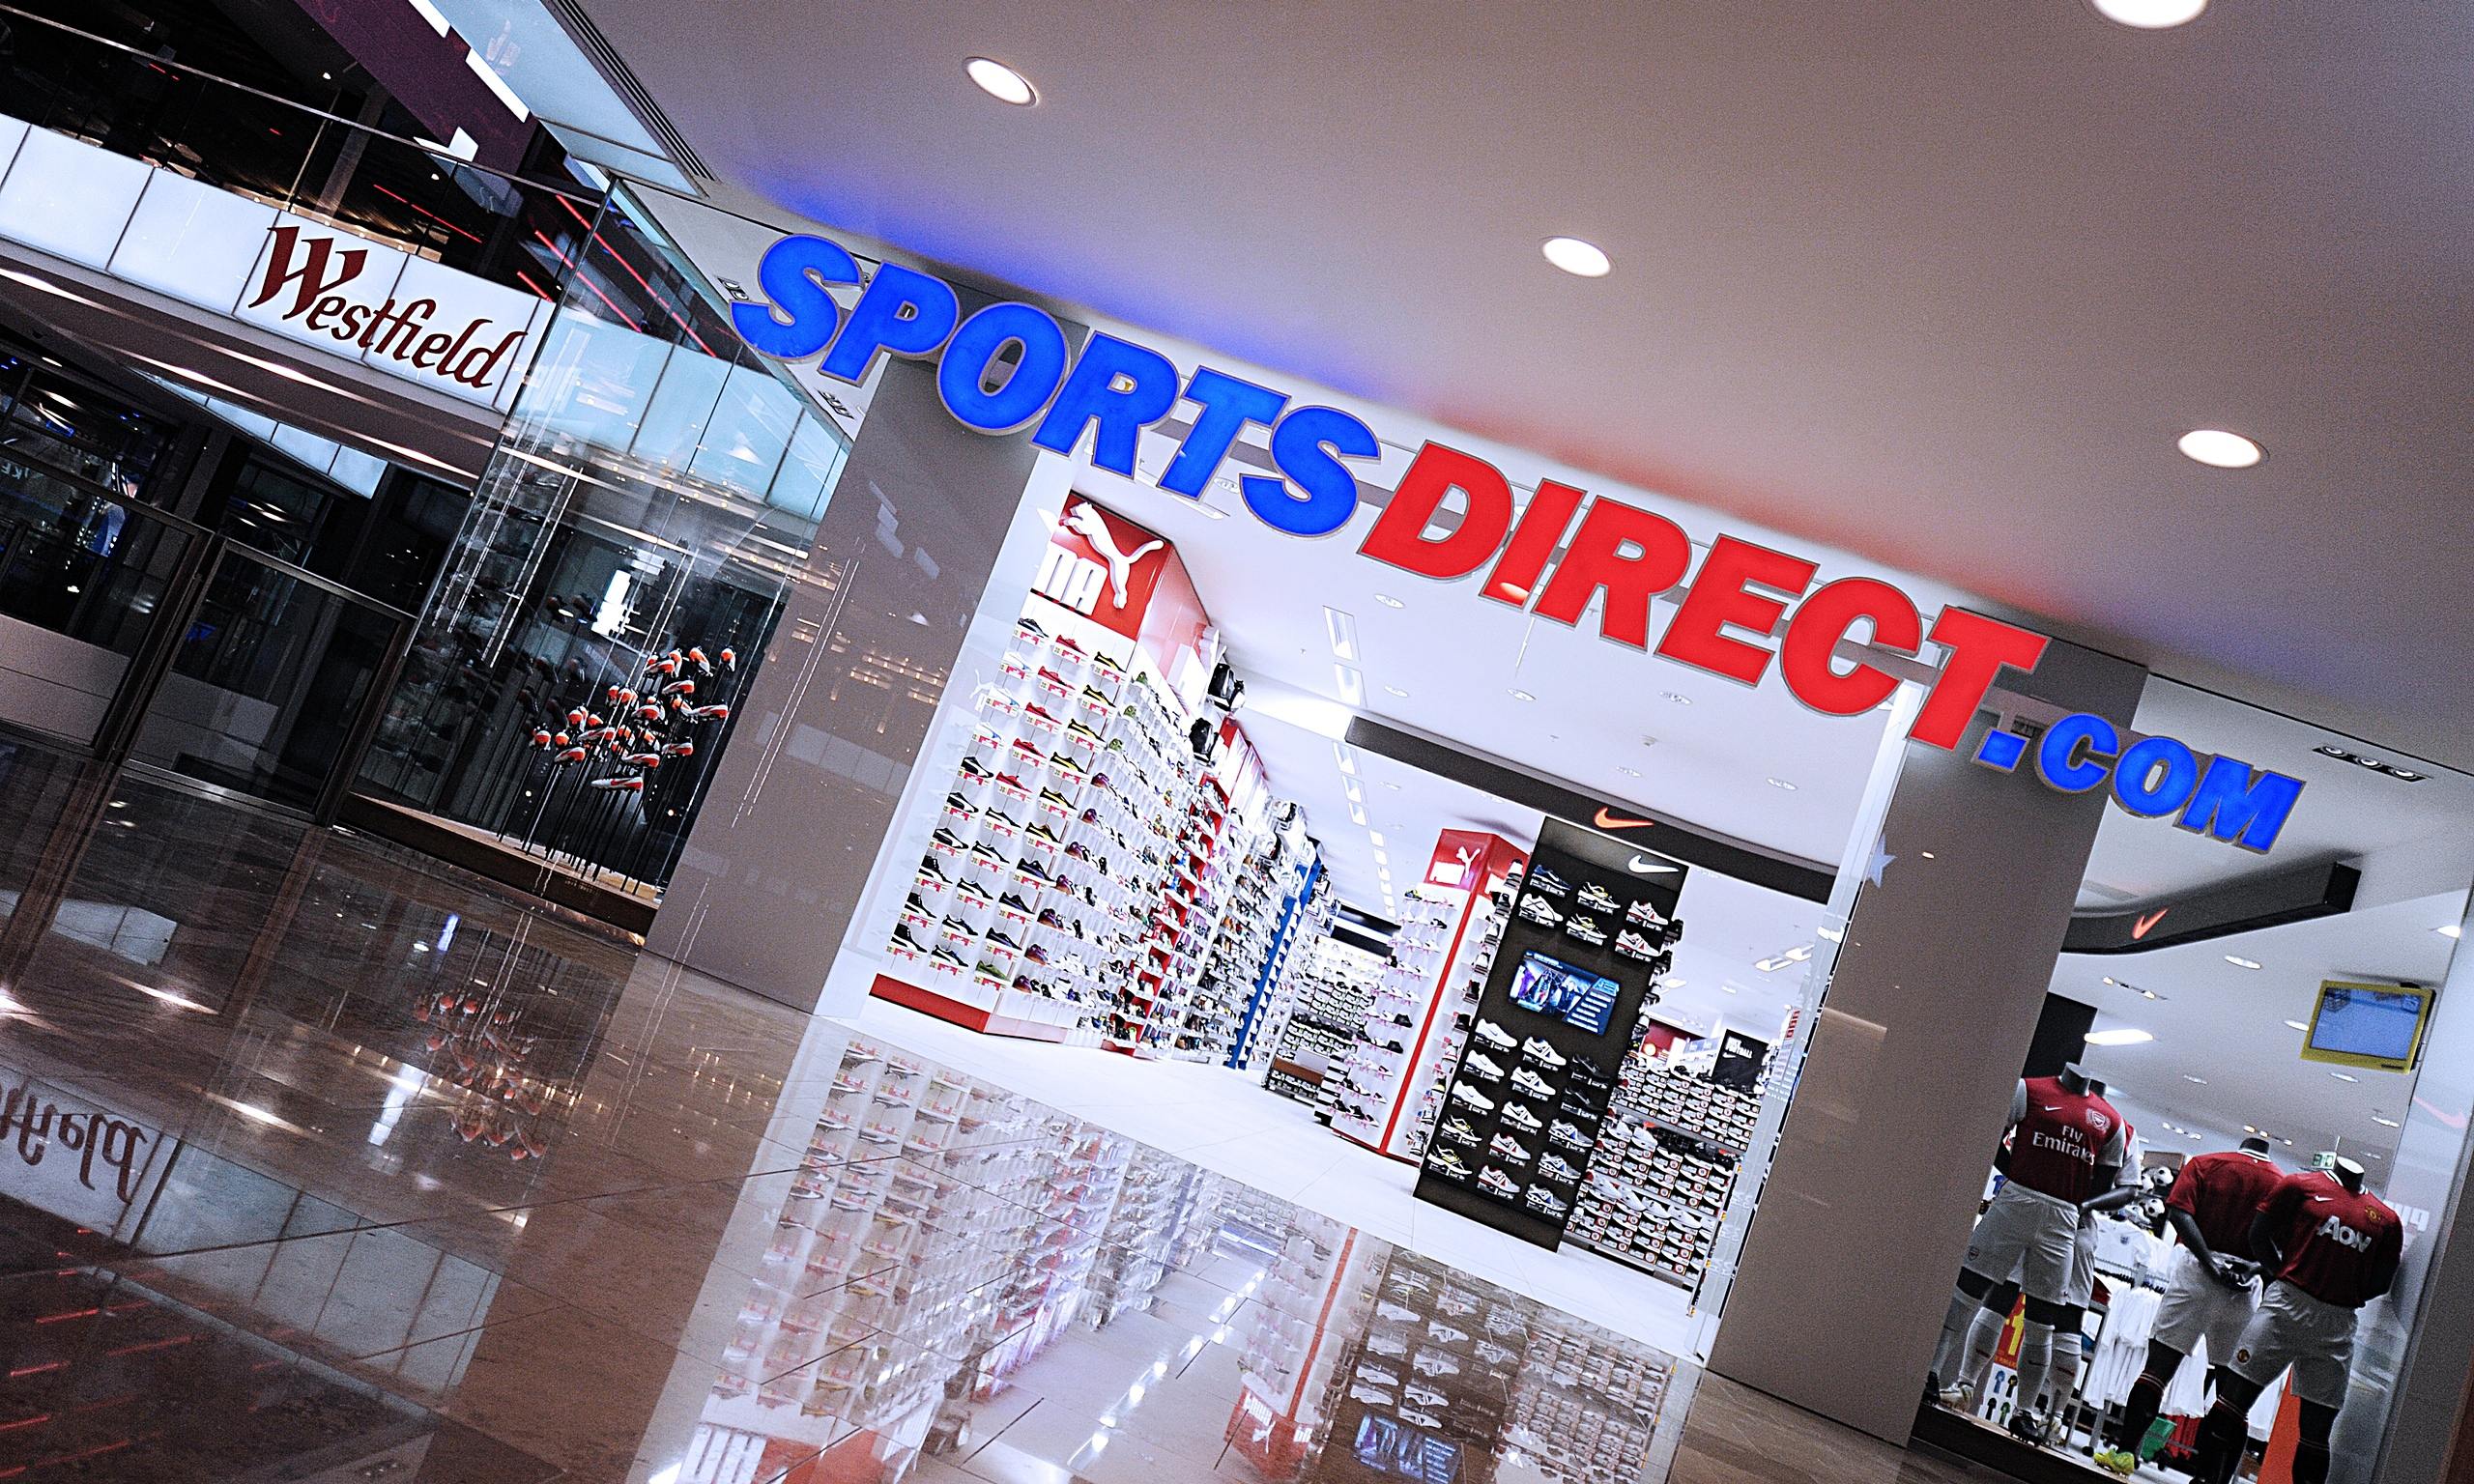 Debenhams to open Sports Direct concessions | Business | The Guardian